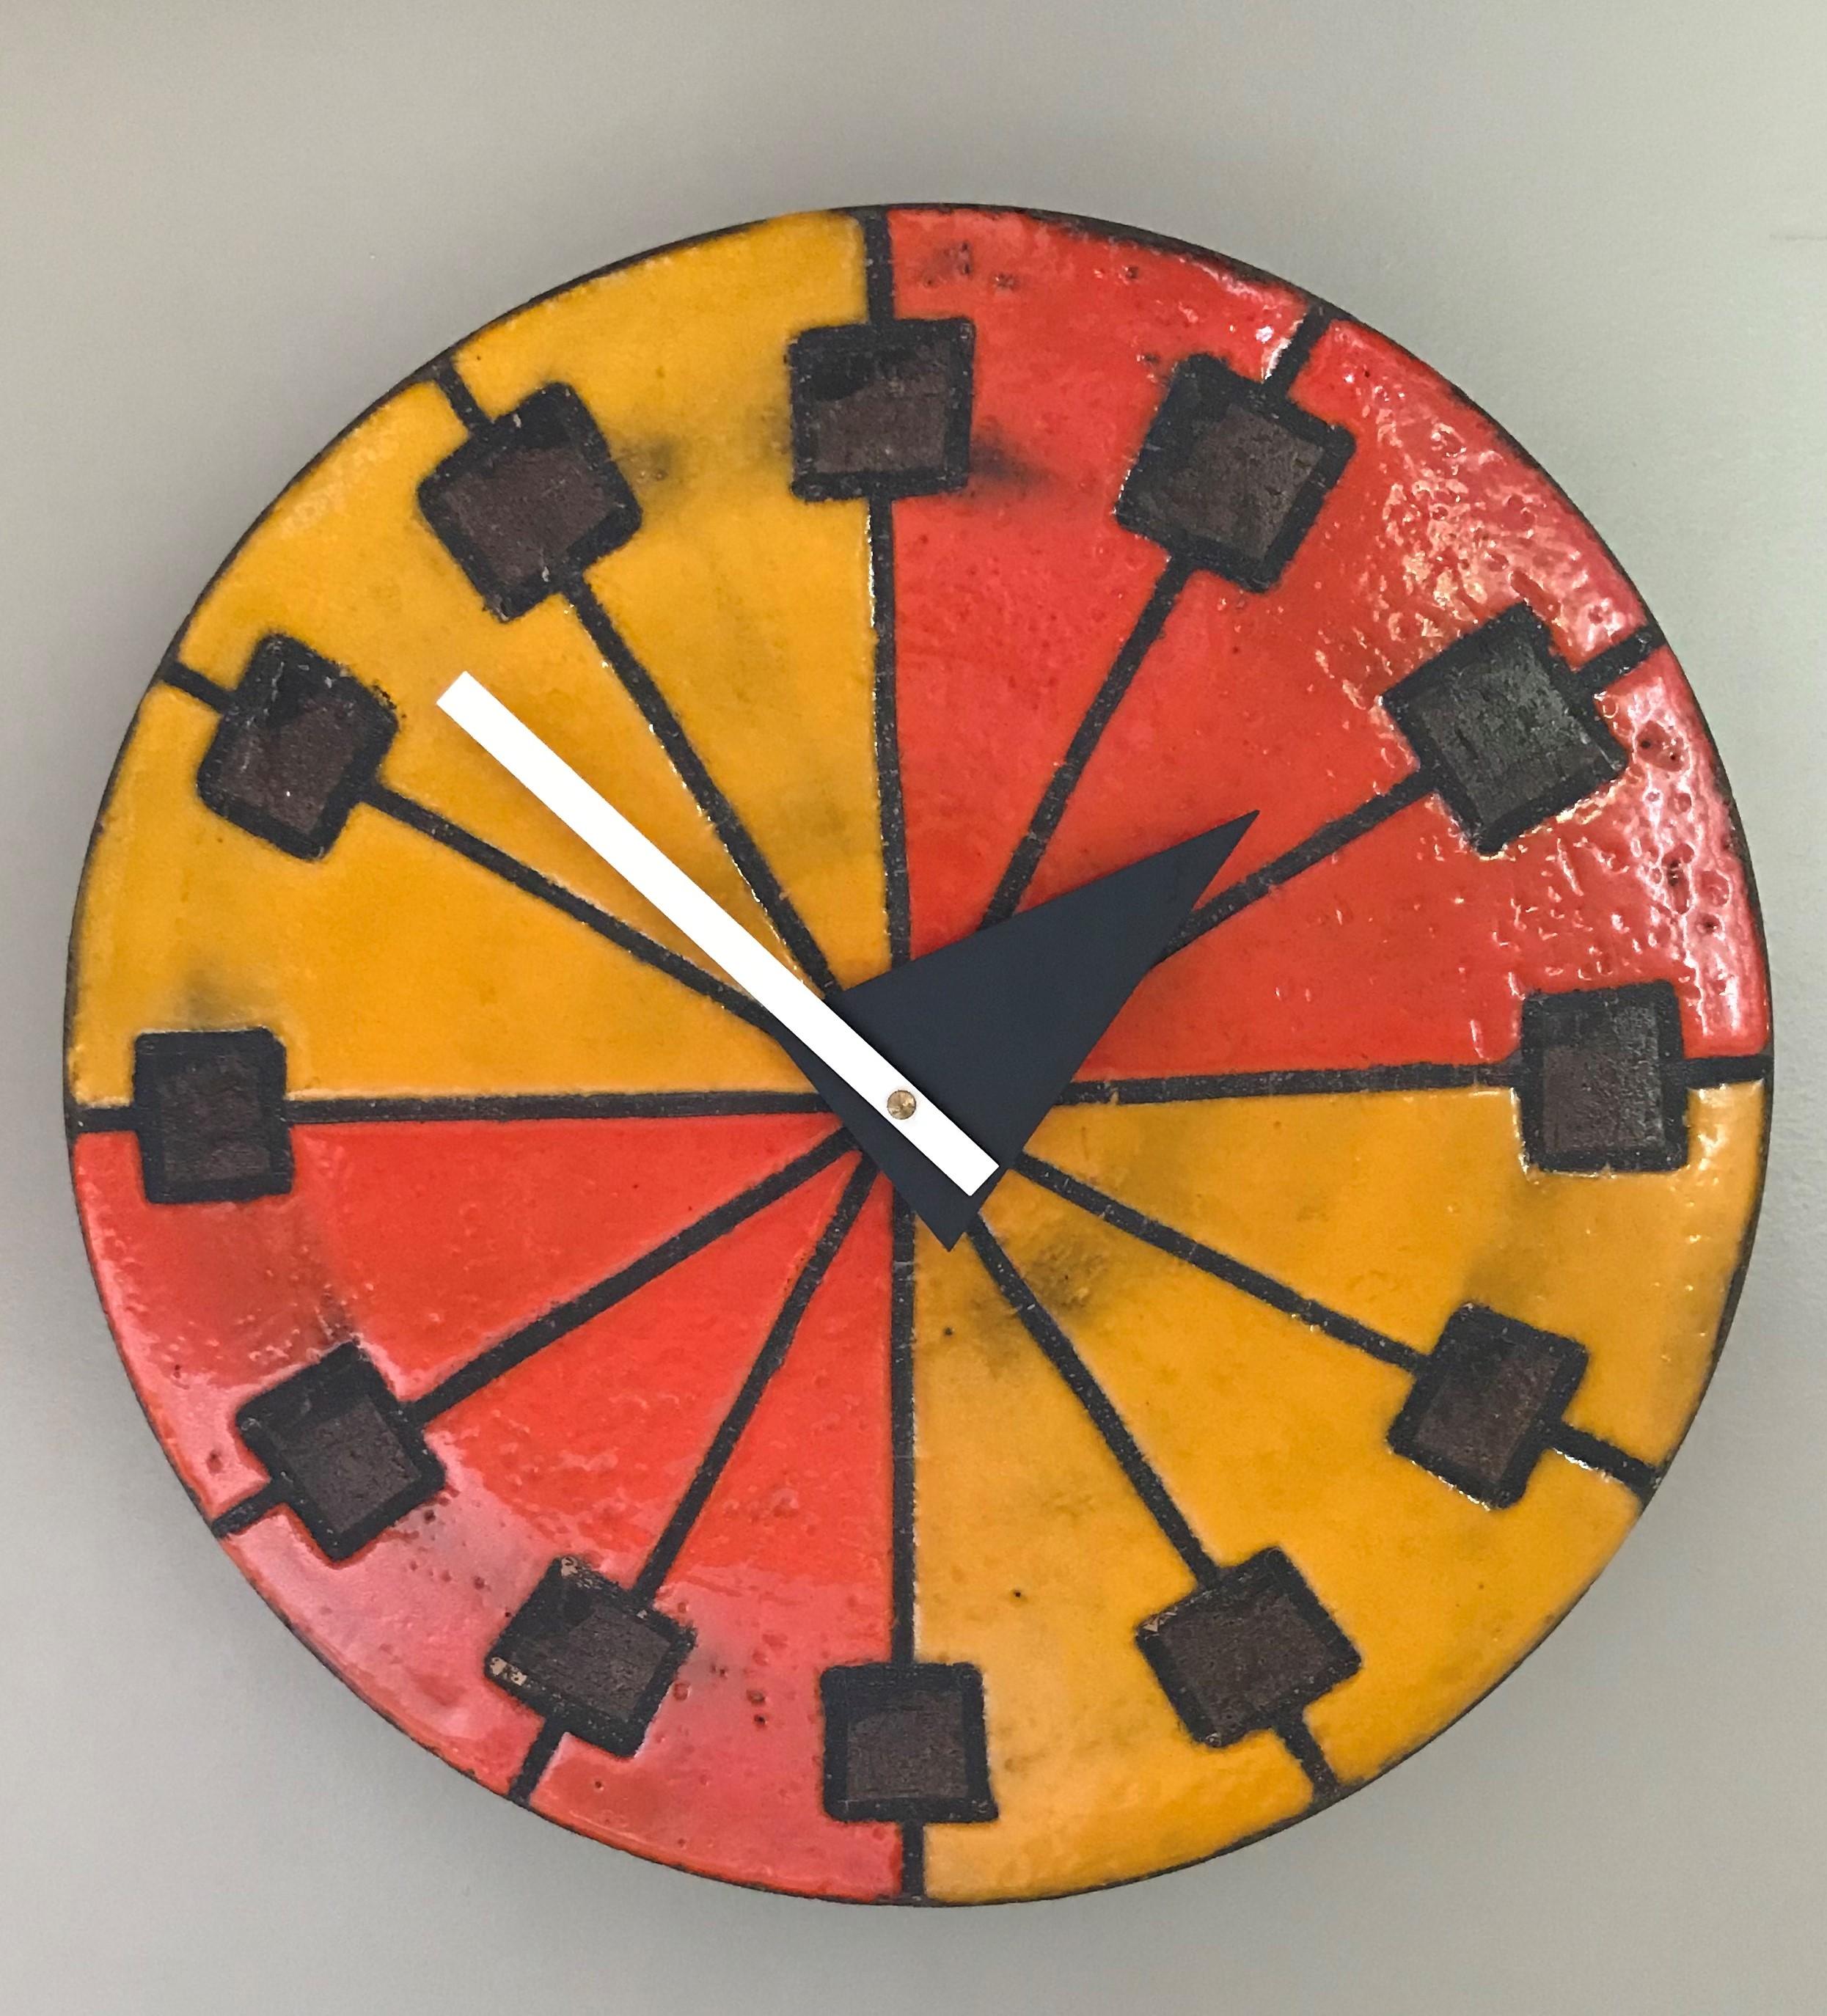 A colorfull Mid-Century Modern Italian ceramic wall clock from the Howard Miller Meridian Collection.  A spoke design with small brown squares at their ends, colored in vivid Orange and Yellow glazes.  The old clock movement was replace with a